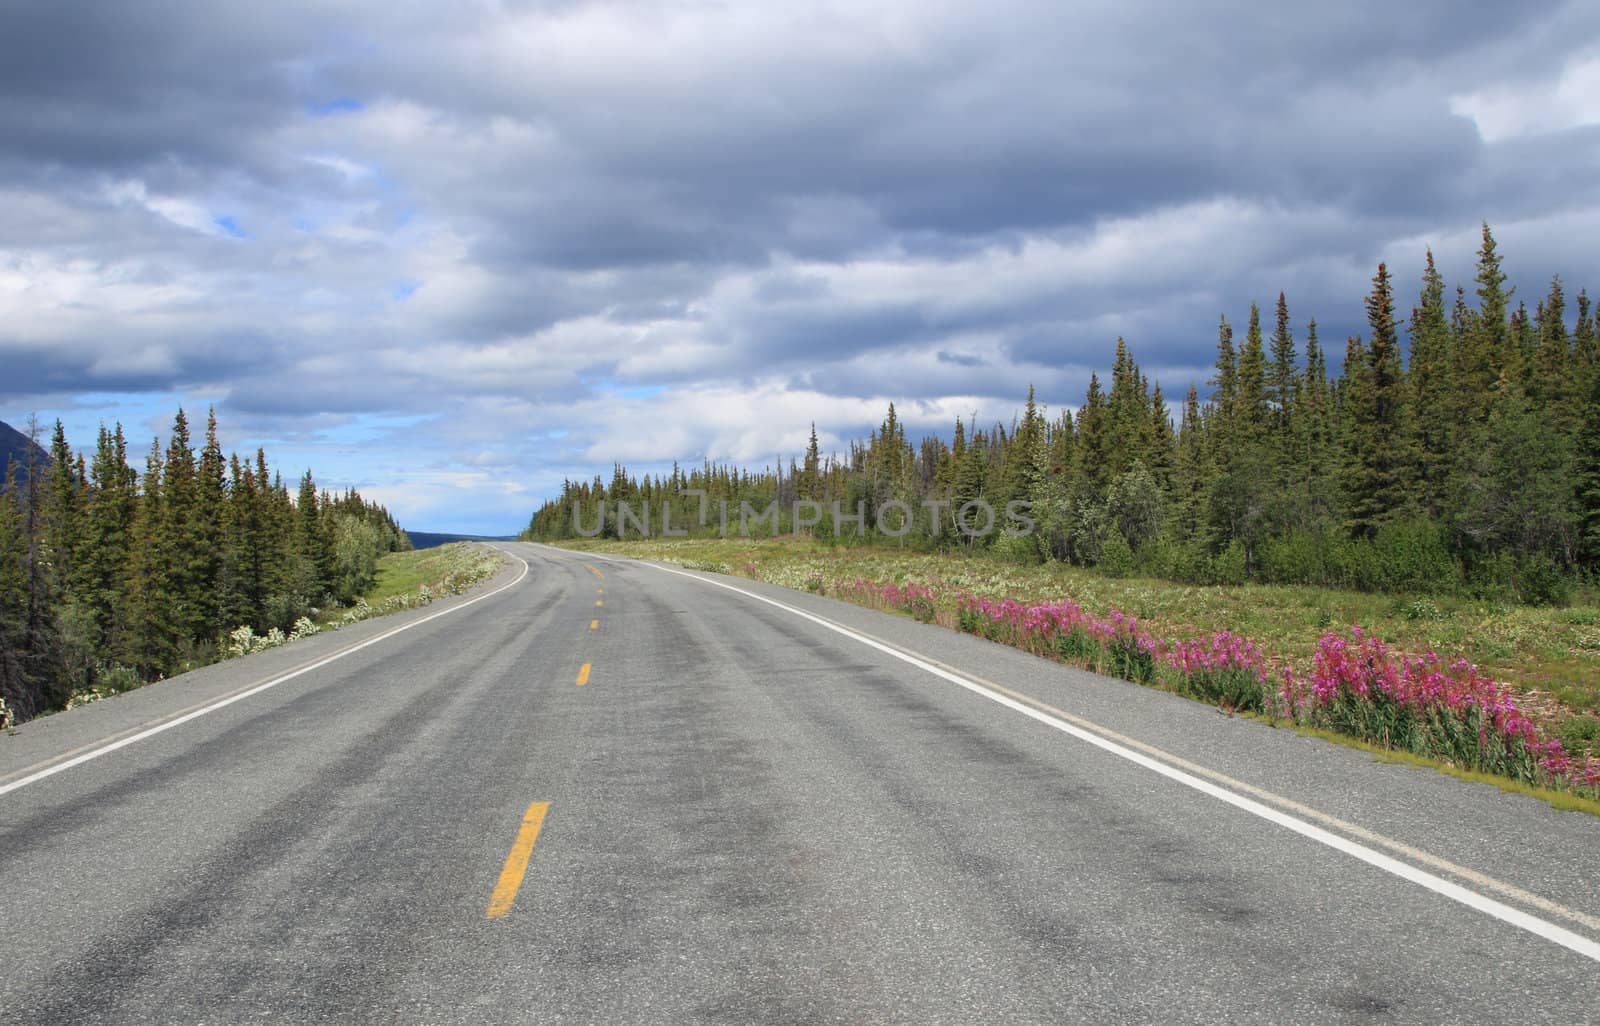 scenic Richardson highway in Alaska with trees and flowers at roadside and ominous cloudy sky